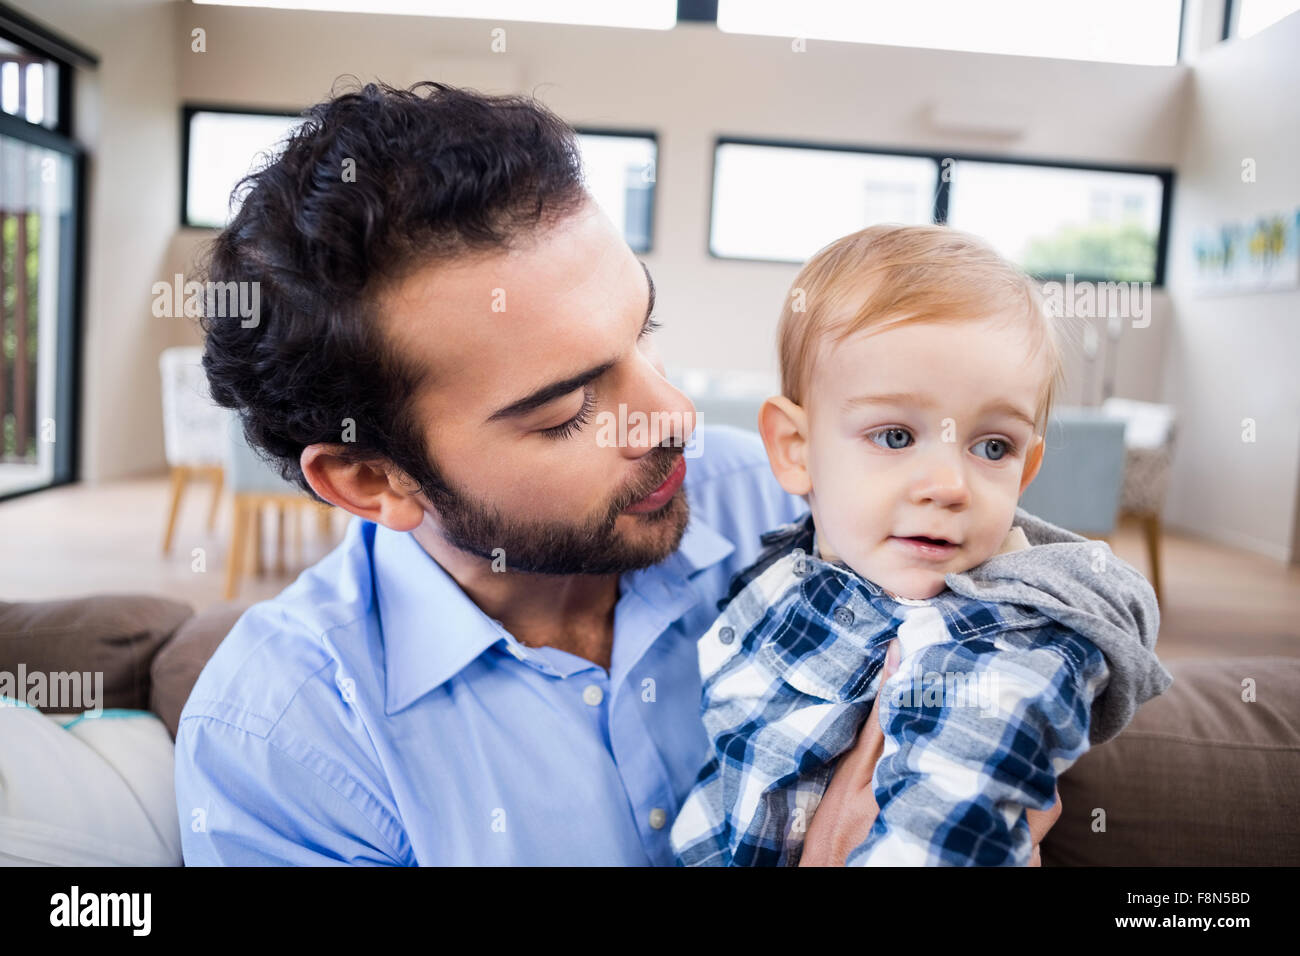 Handsome man with child Stock Photo